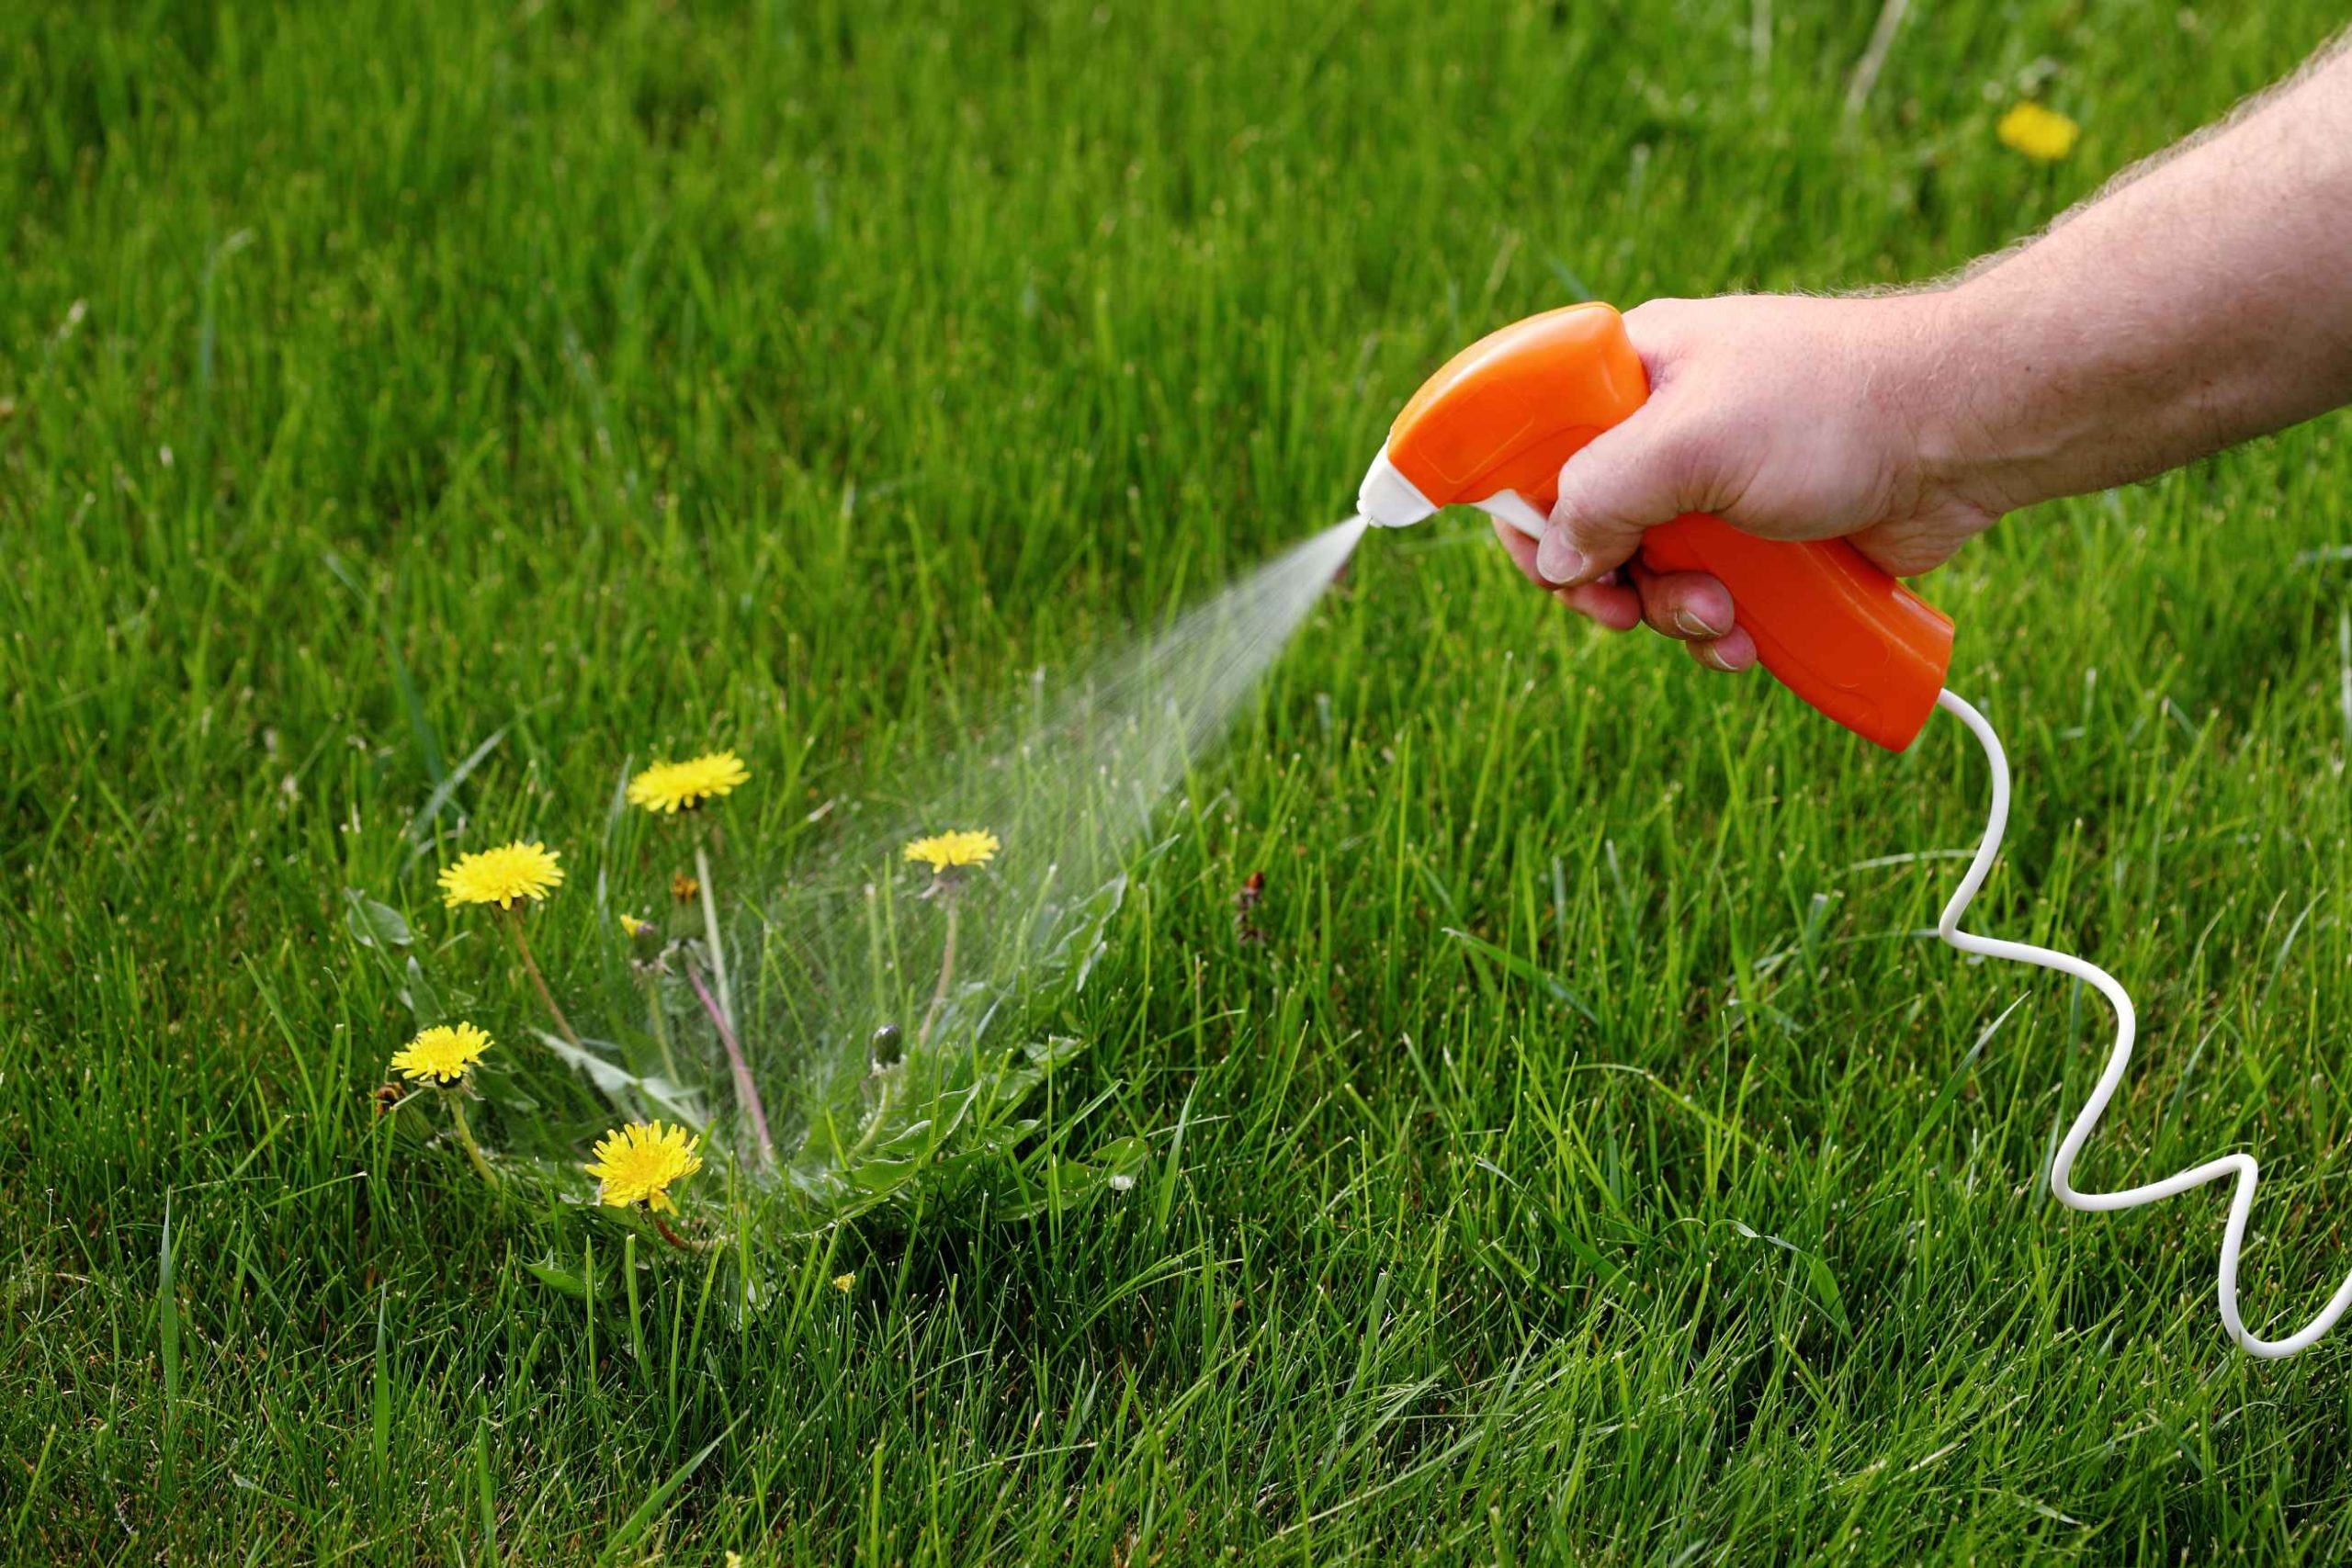 Examining The Dangers of Garden and Lawn Care Chemicals